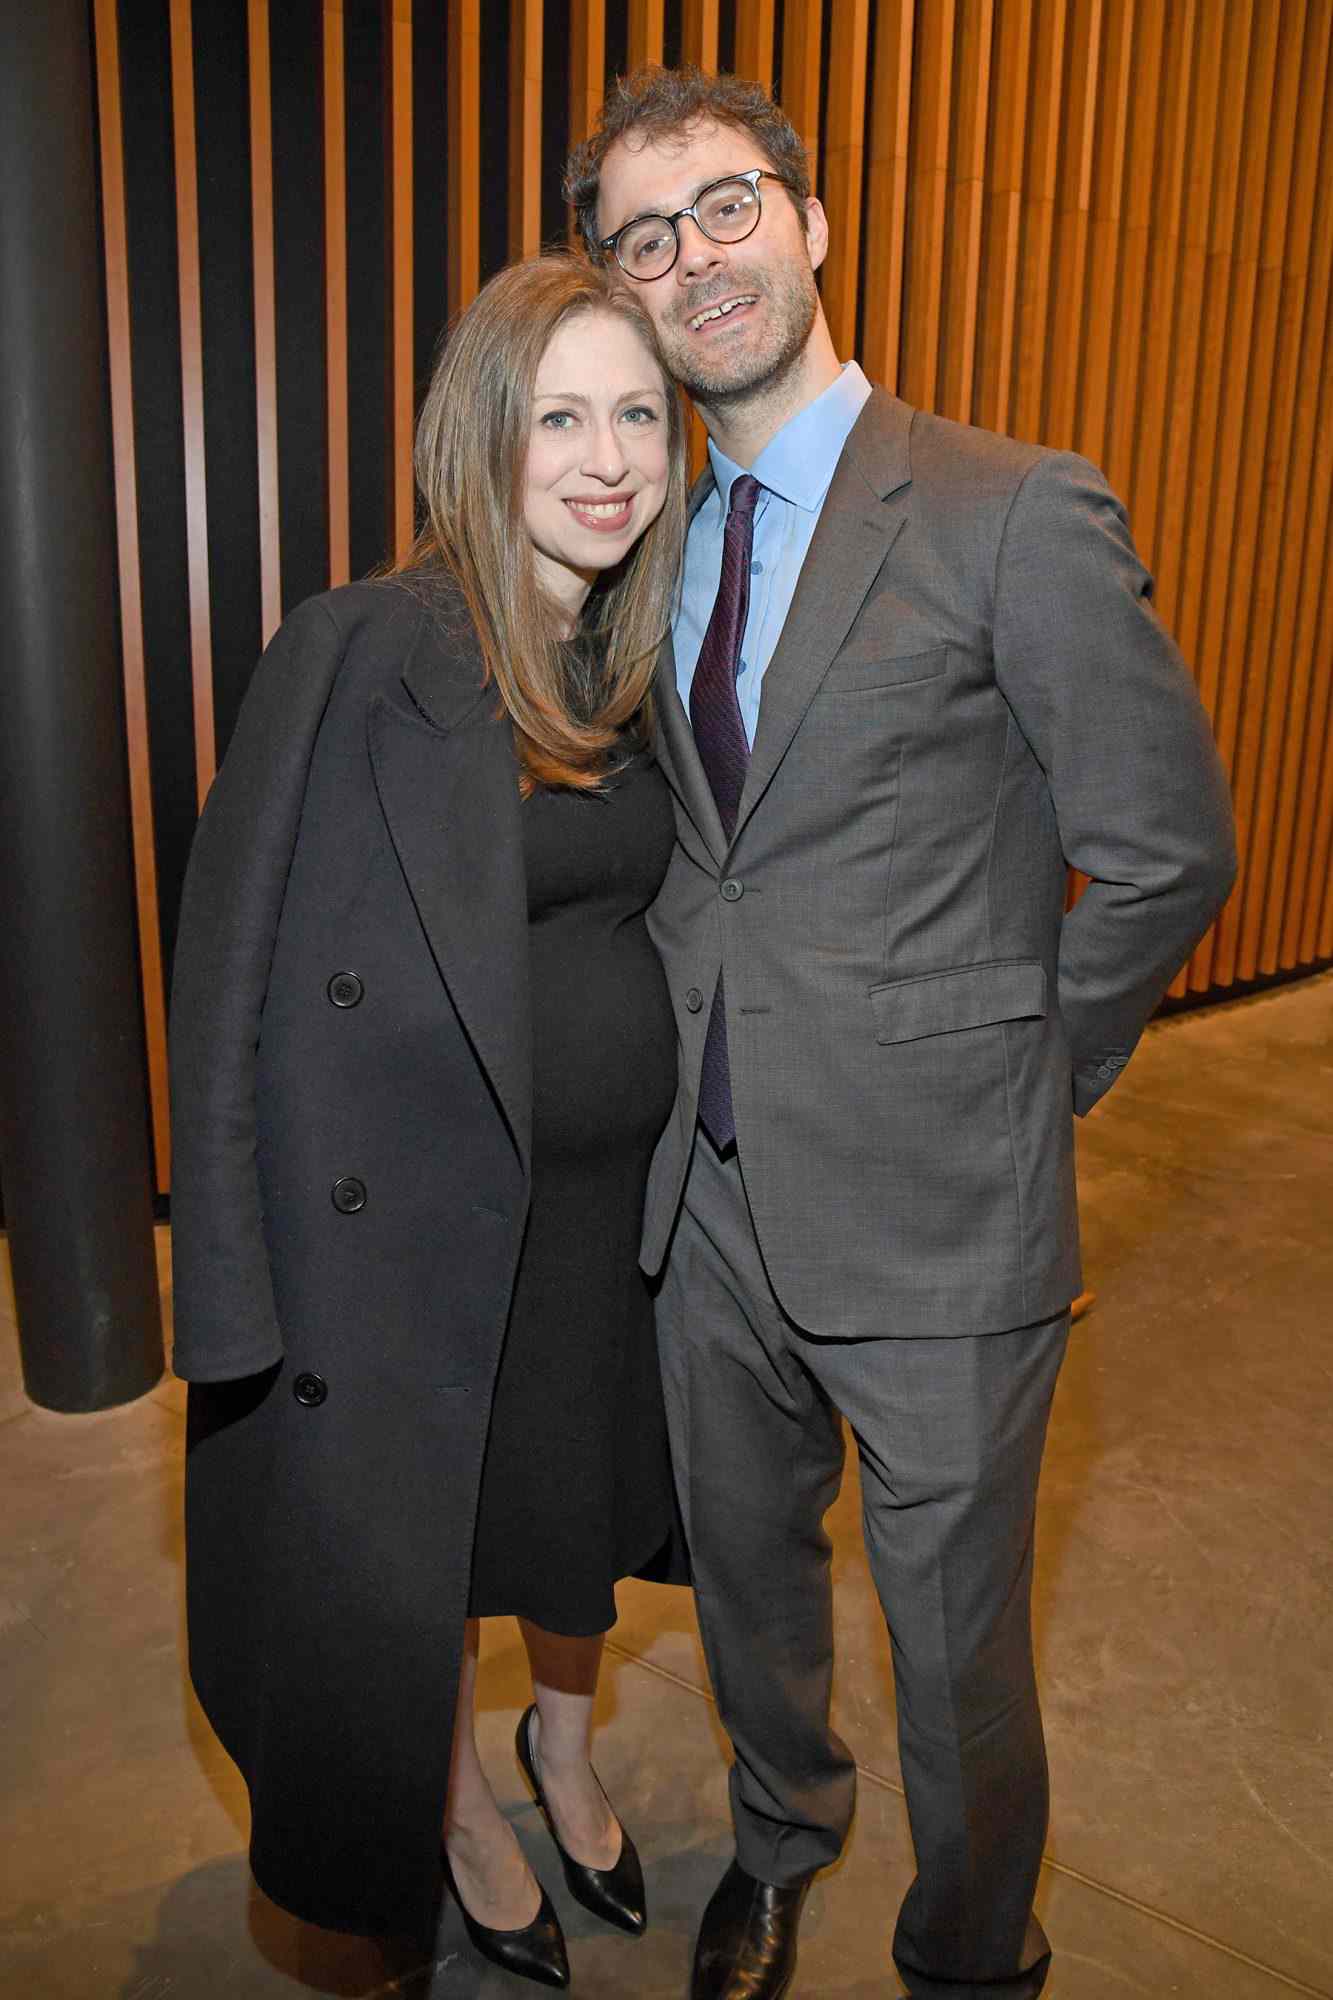 Chelsea Clinton/ baby bump and husband - Statue of liberty